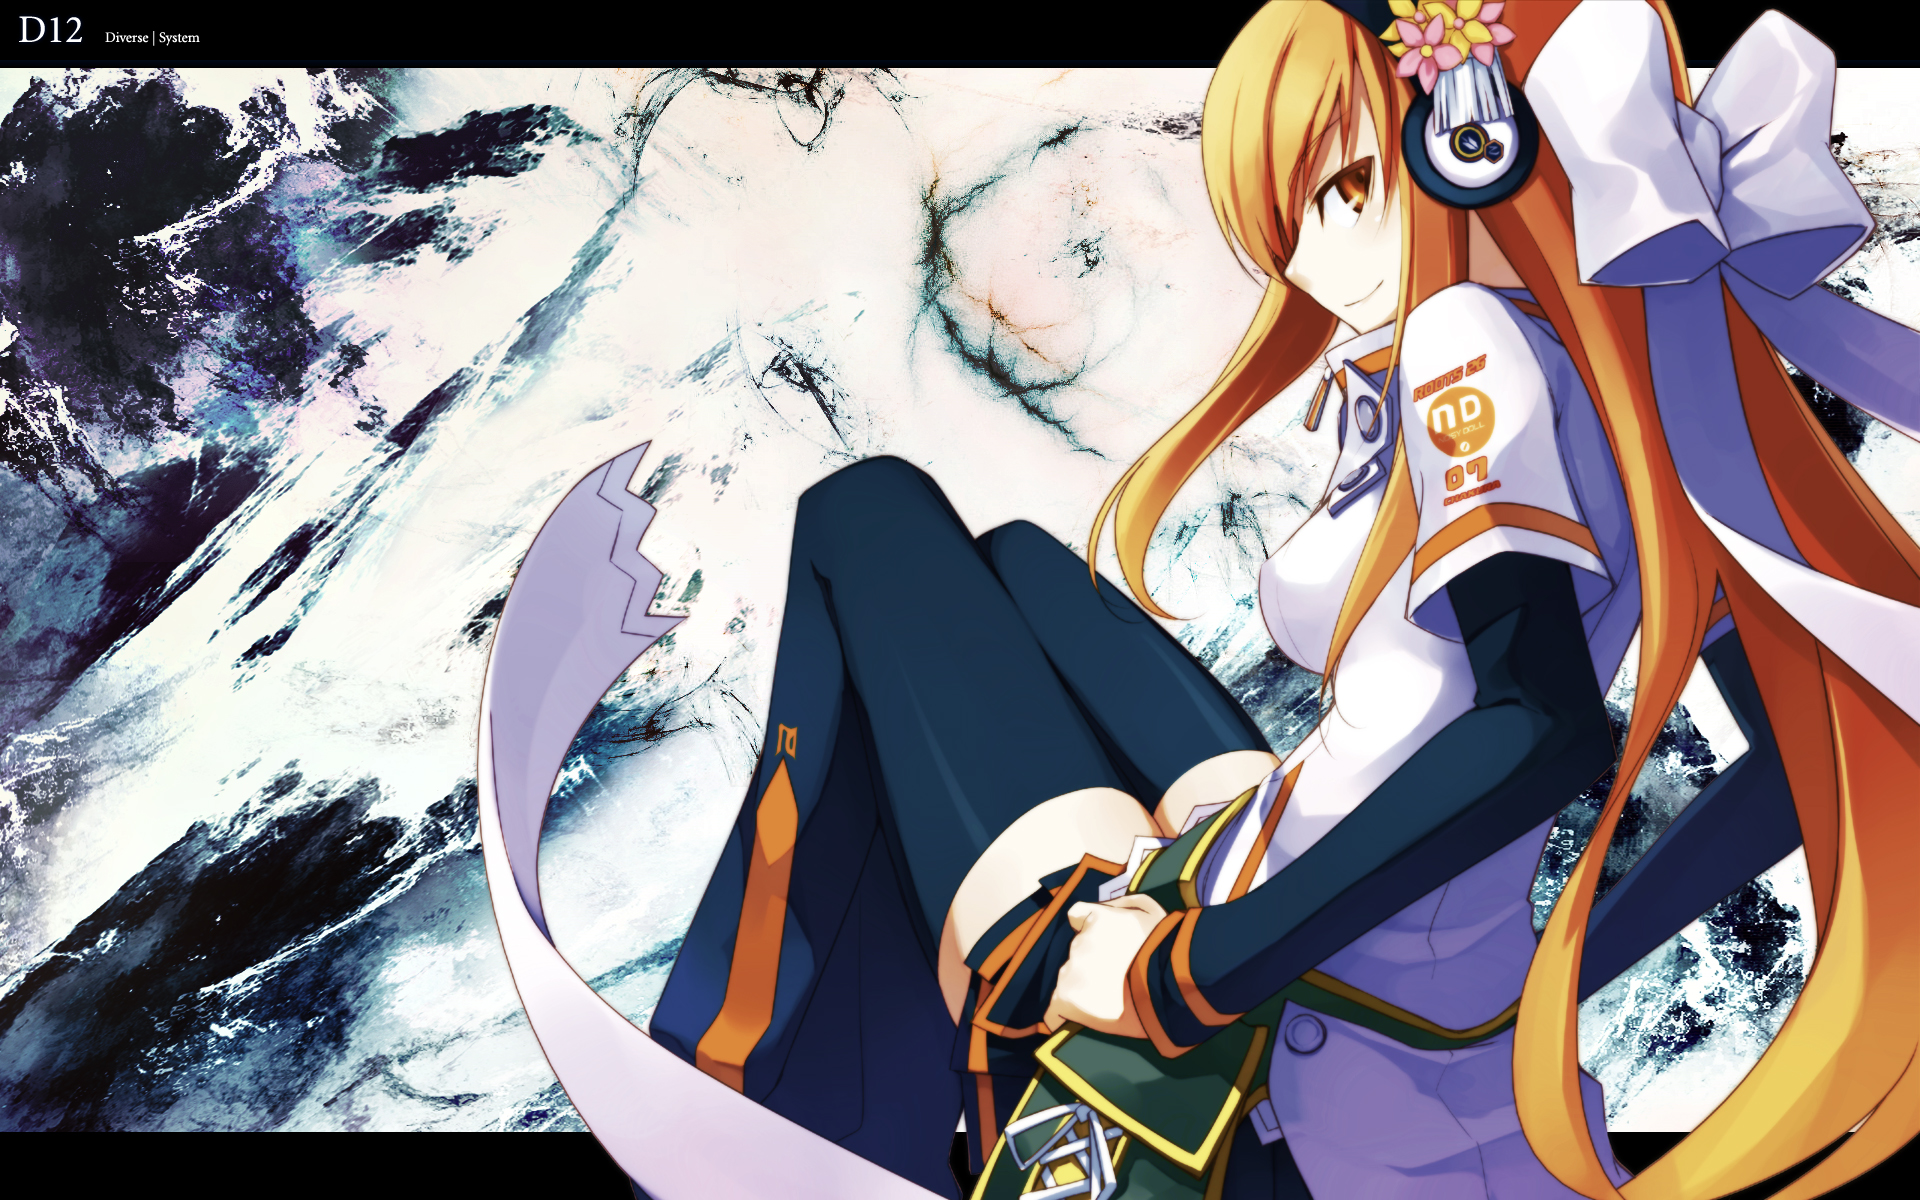 Extremely Cool Anime Wallpaper Picserio - Headphone Anime Girl - HD Wallpaper 